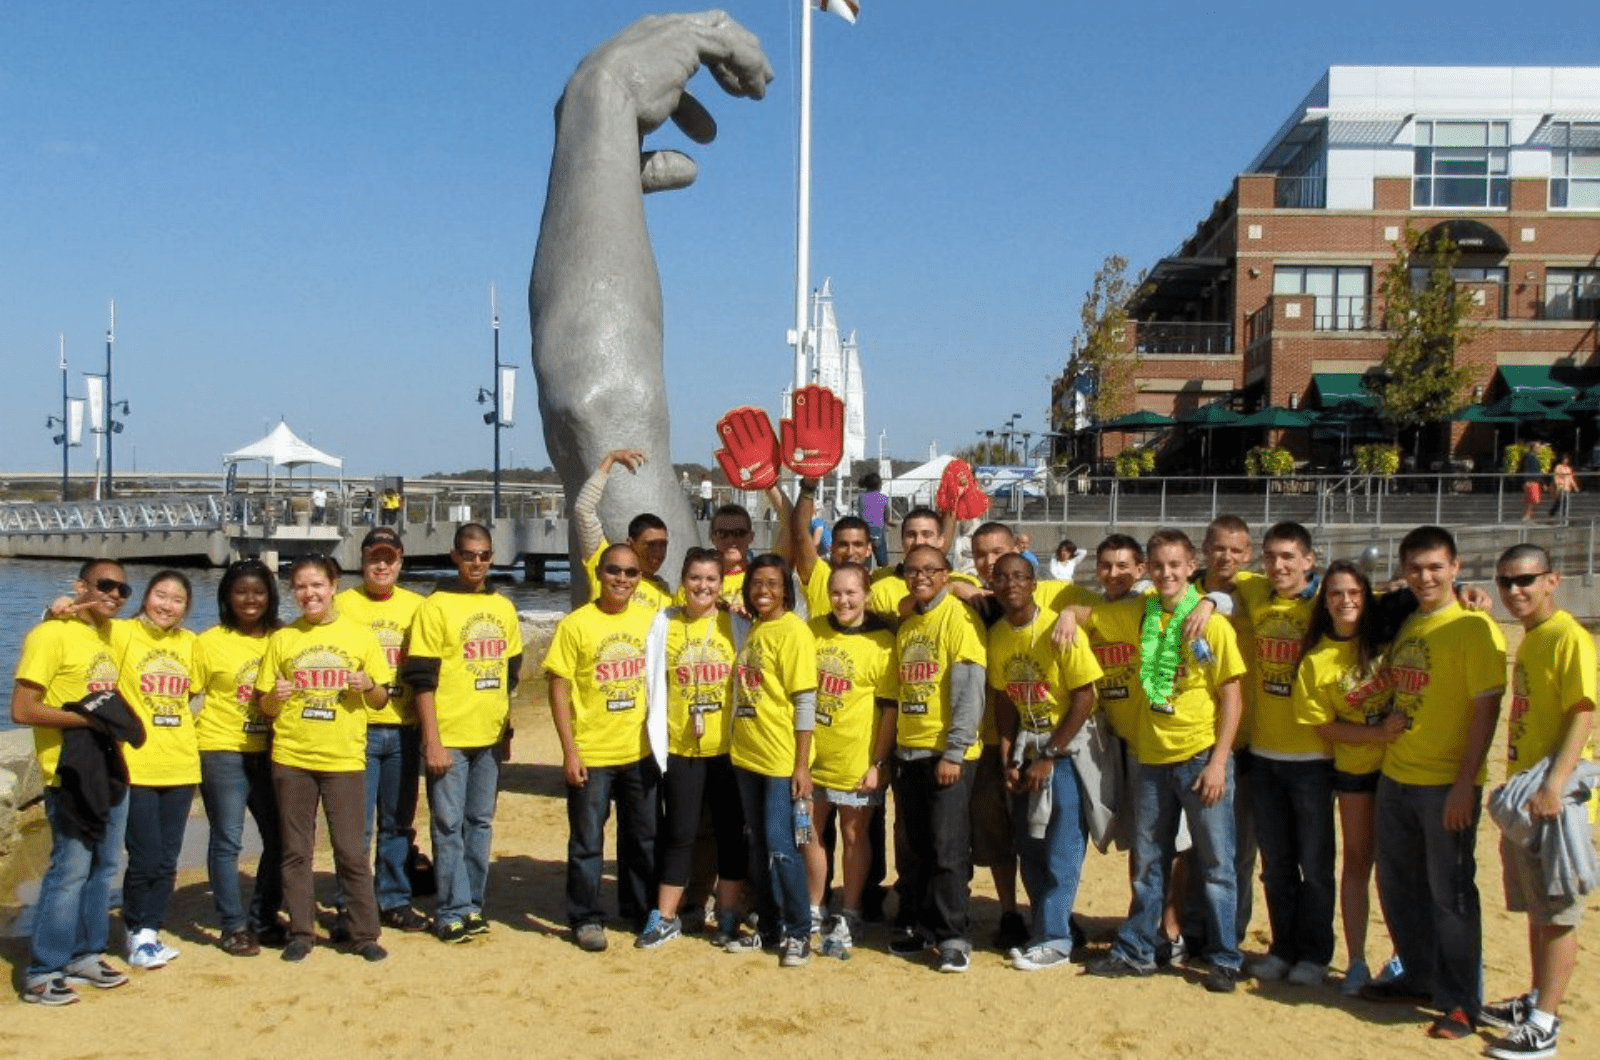 group photo of arnold society members in matching yellow shirts